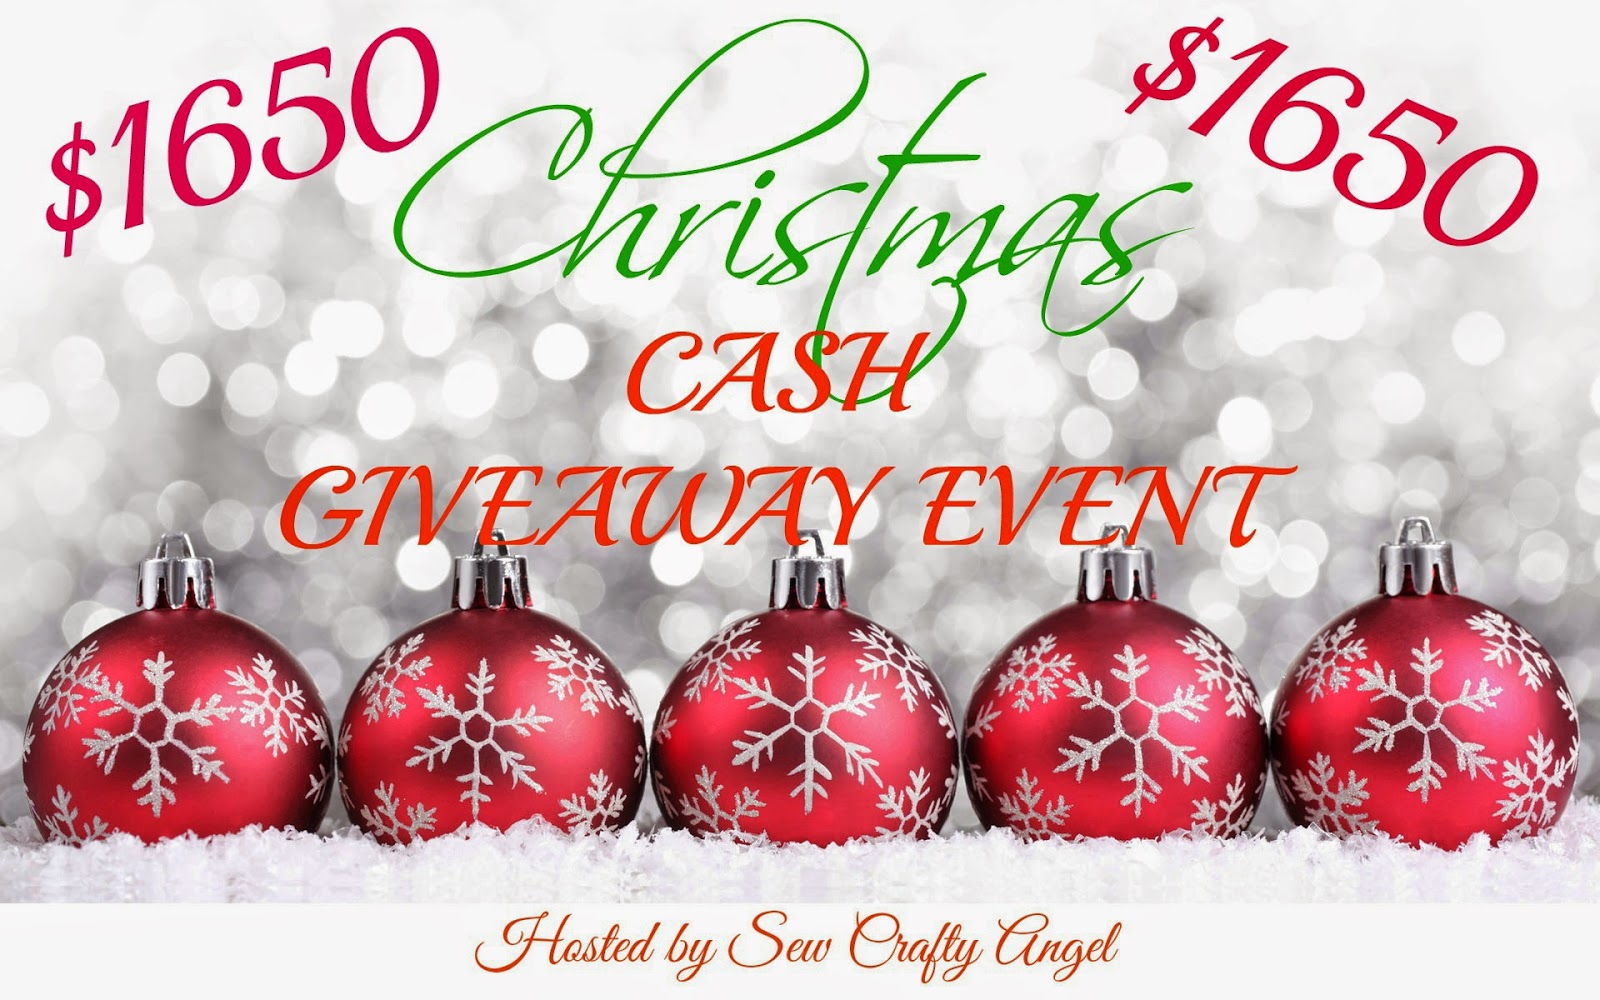 Christmas Cash Giveaway Event